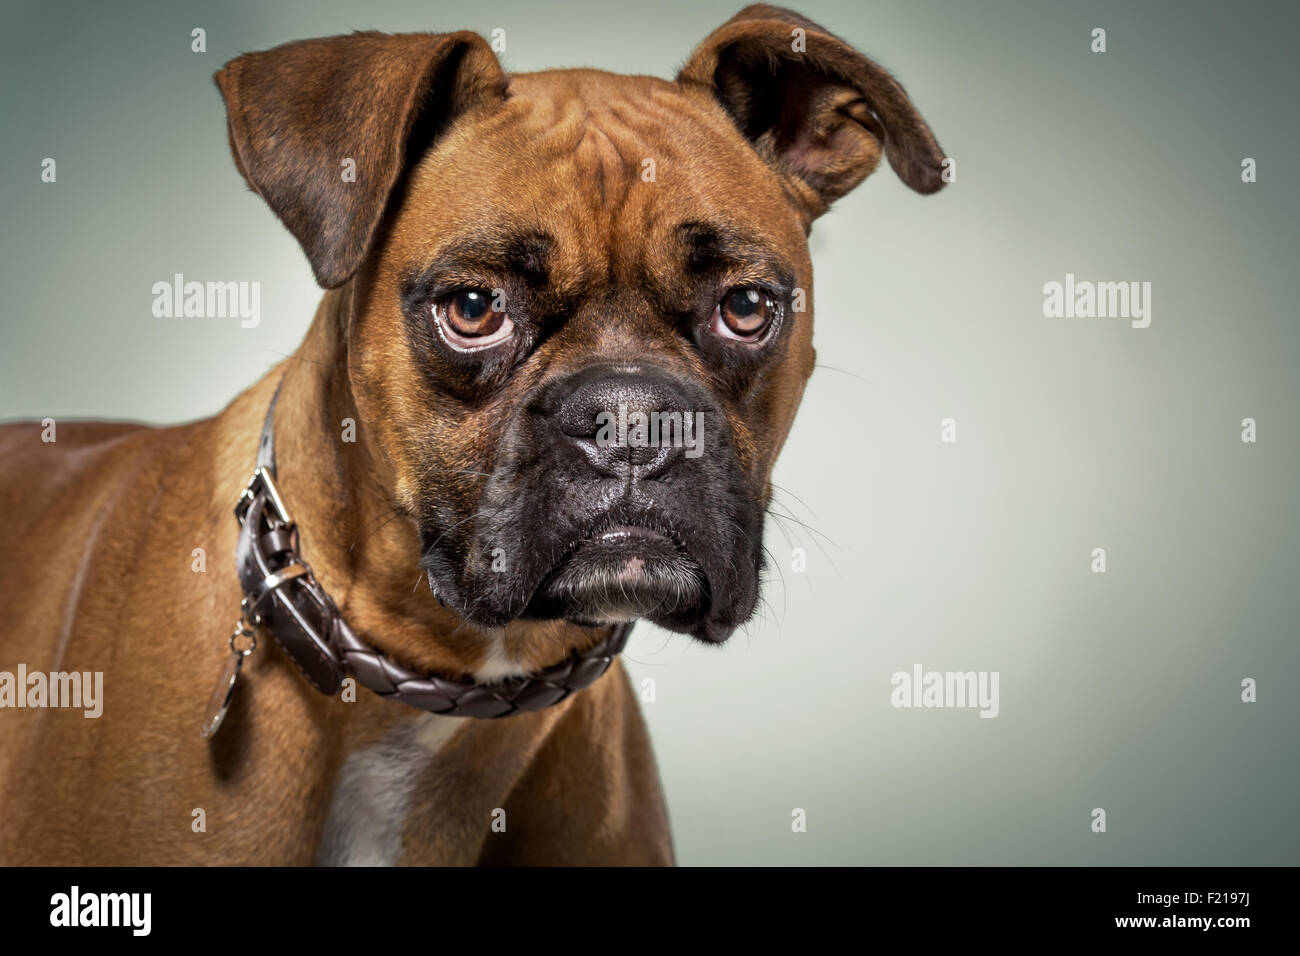 Boxer dog with serious expression in studio. Stock Photo